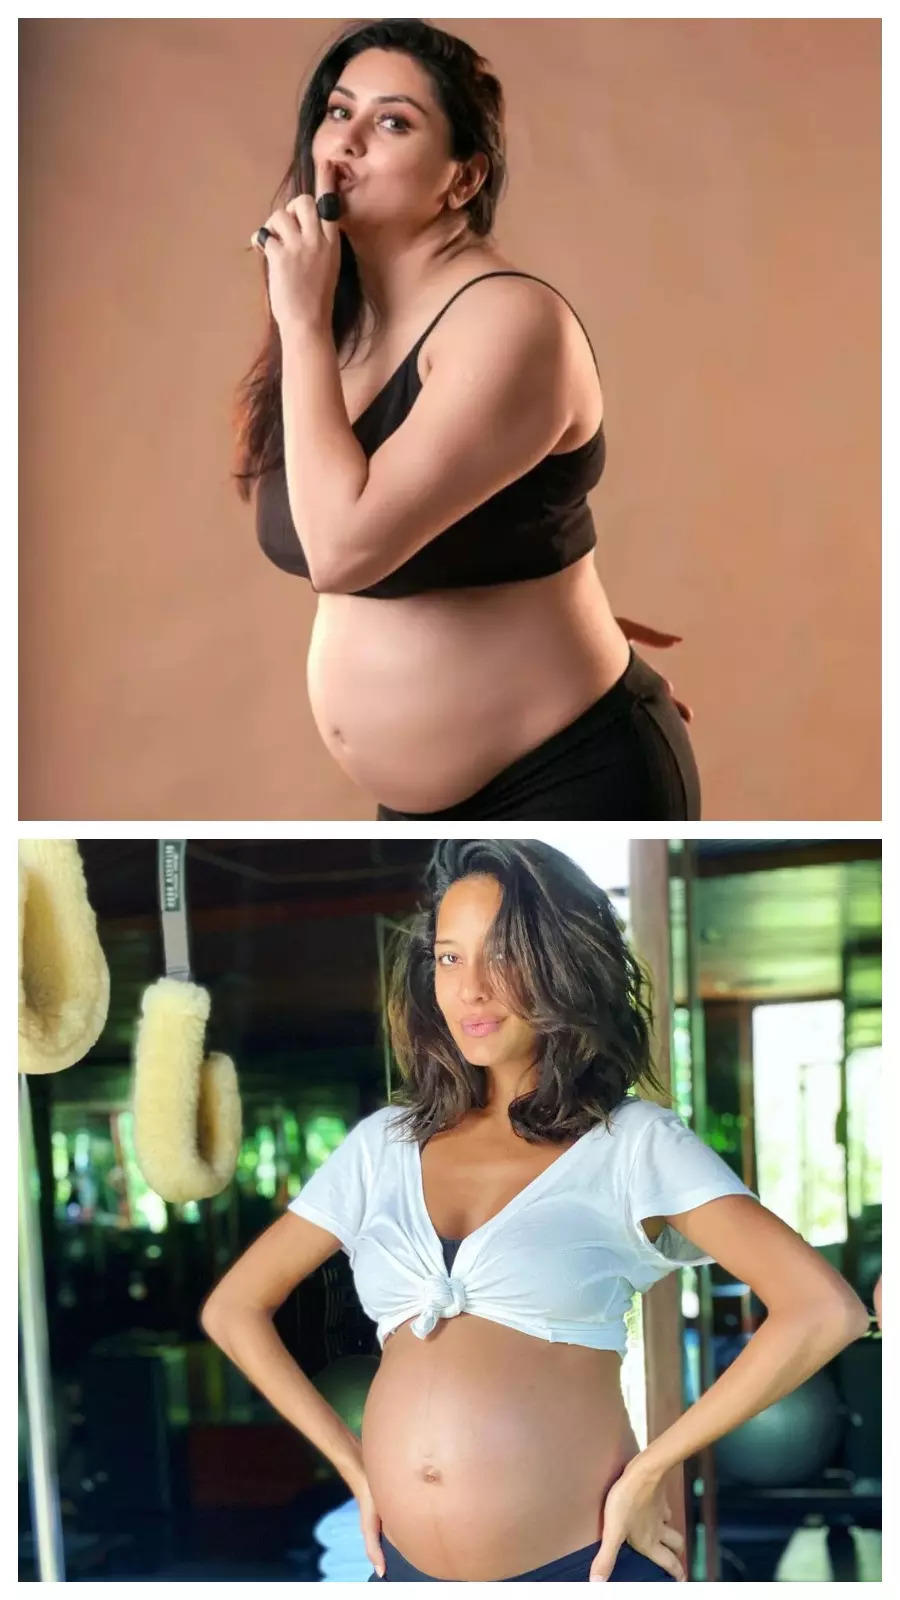 Celebs who flaunted their baby bumps